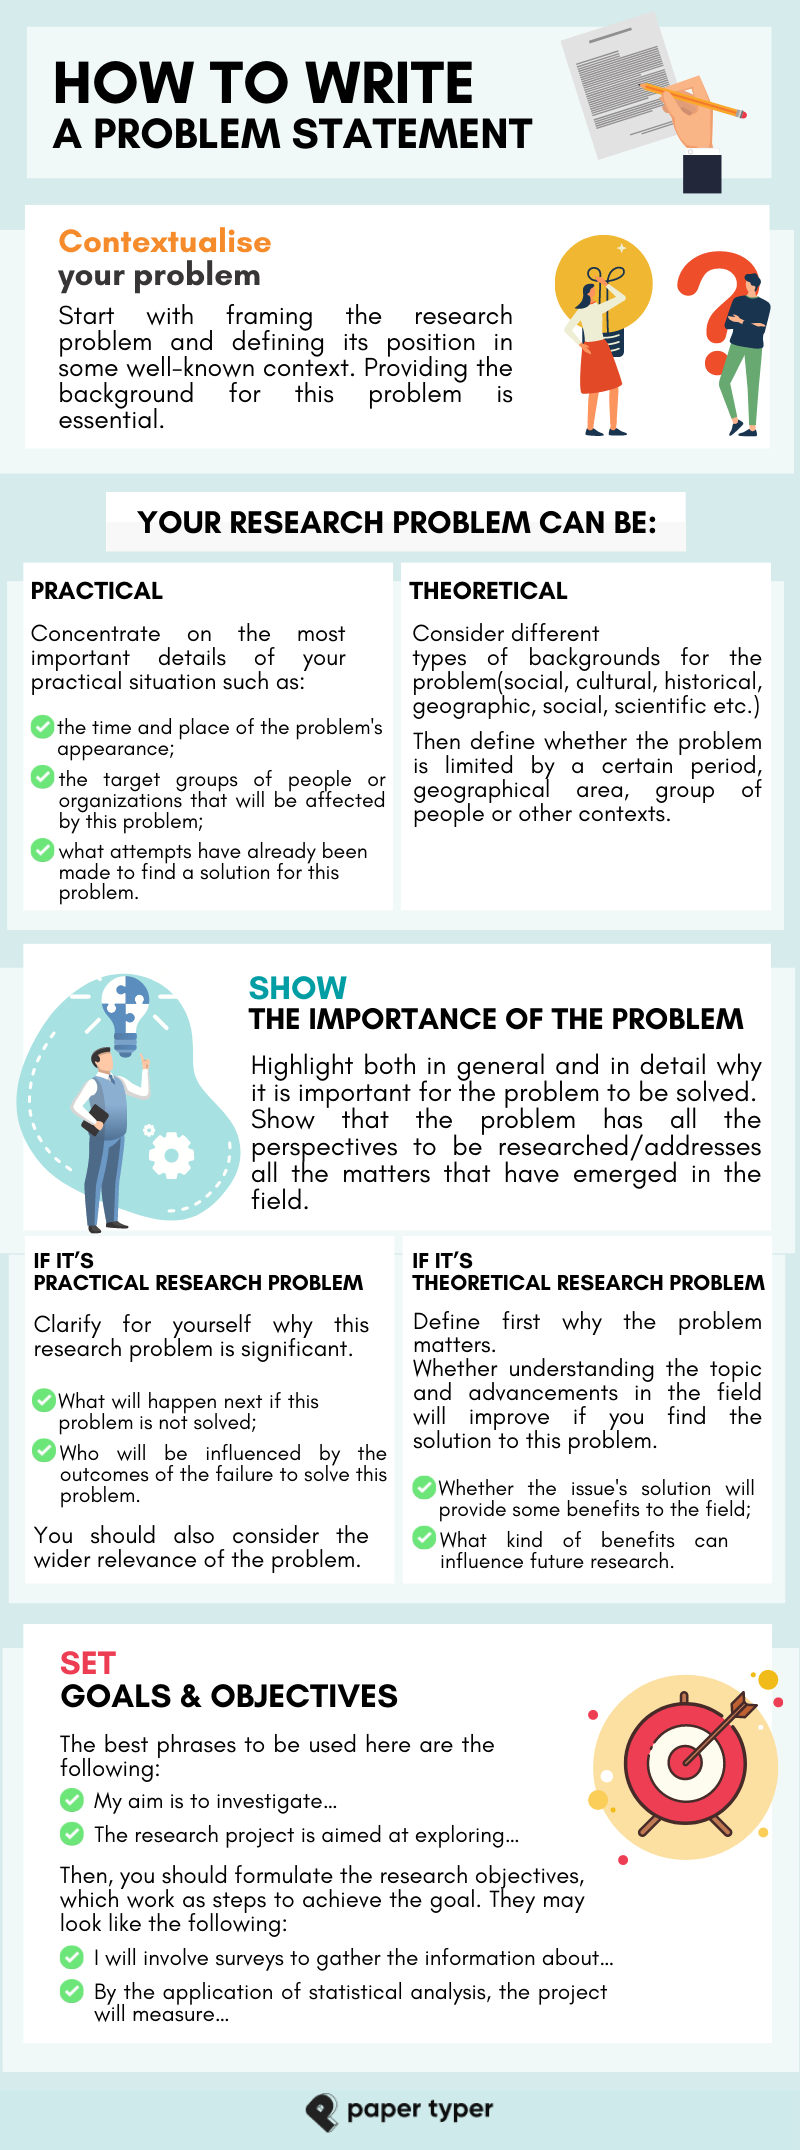 Infographic on how to write a problem statement.